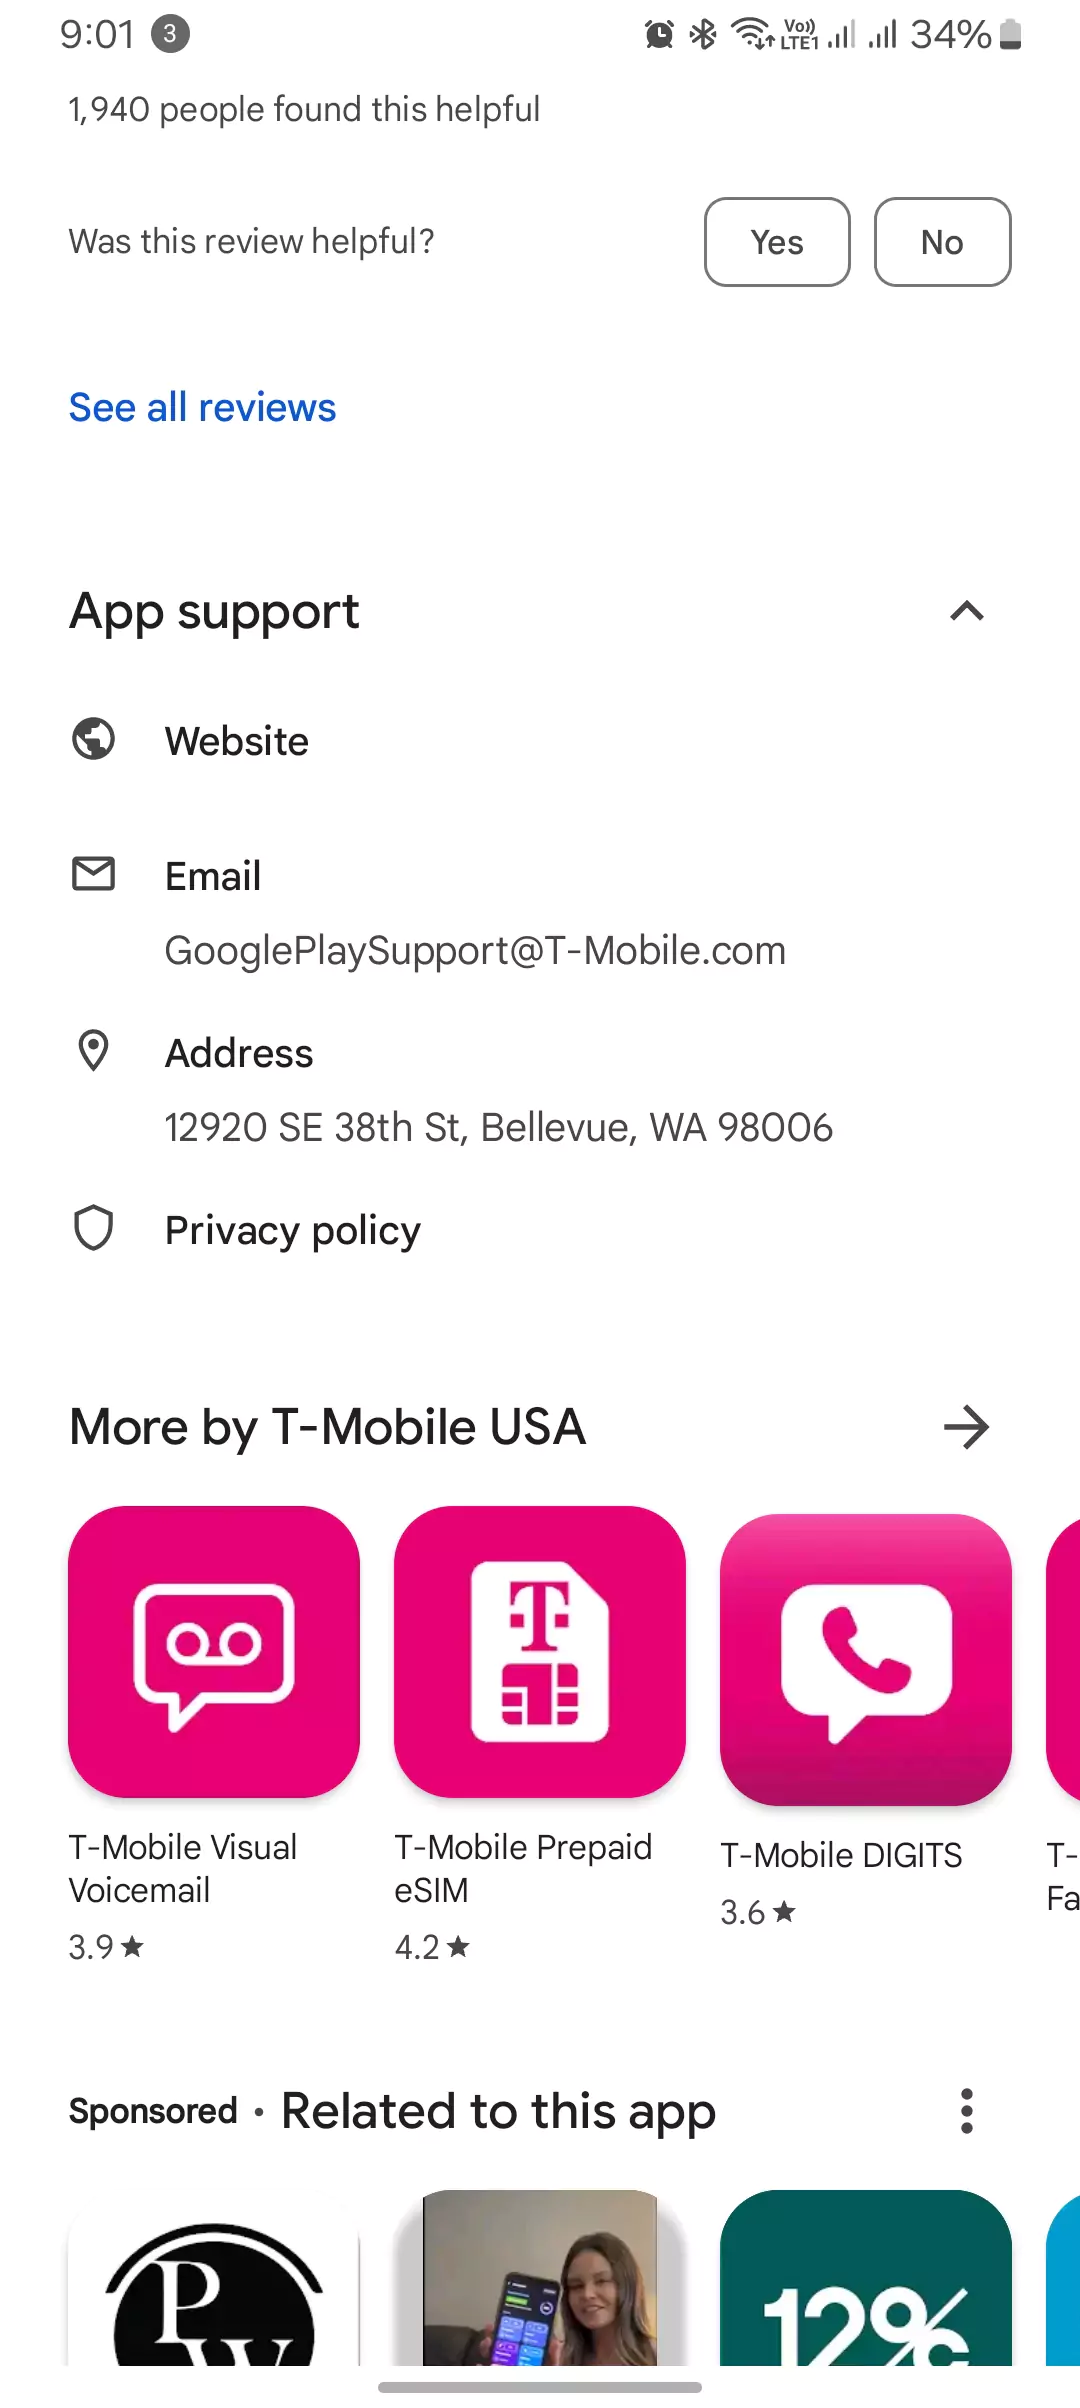 tmobile life (tmobile tuesdays) app cropped play store contact support details